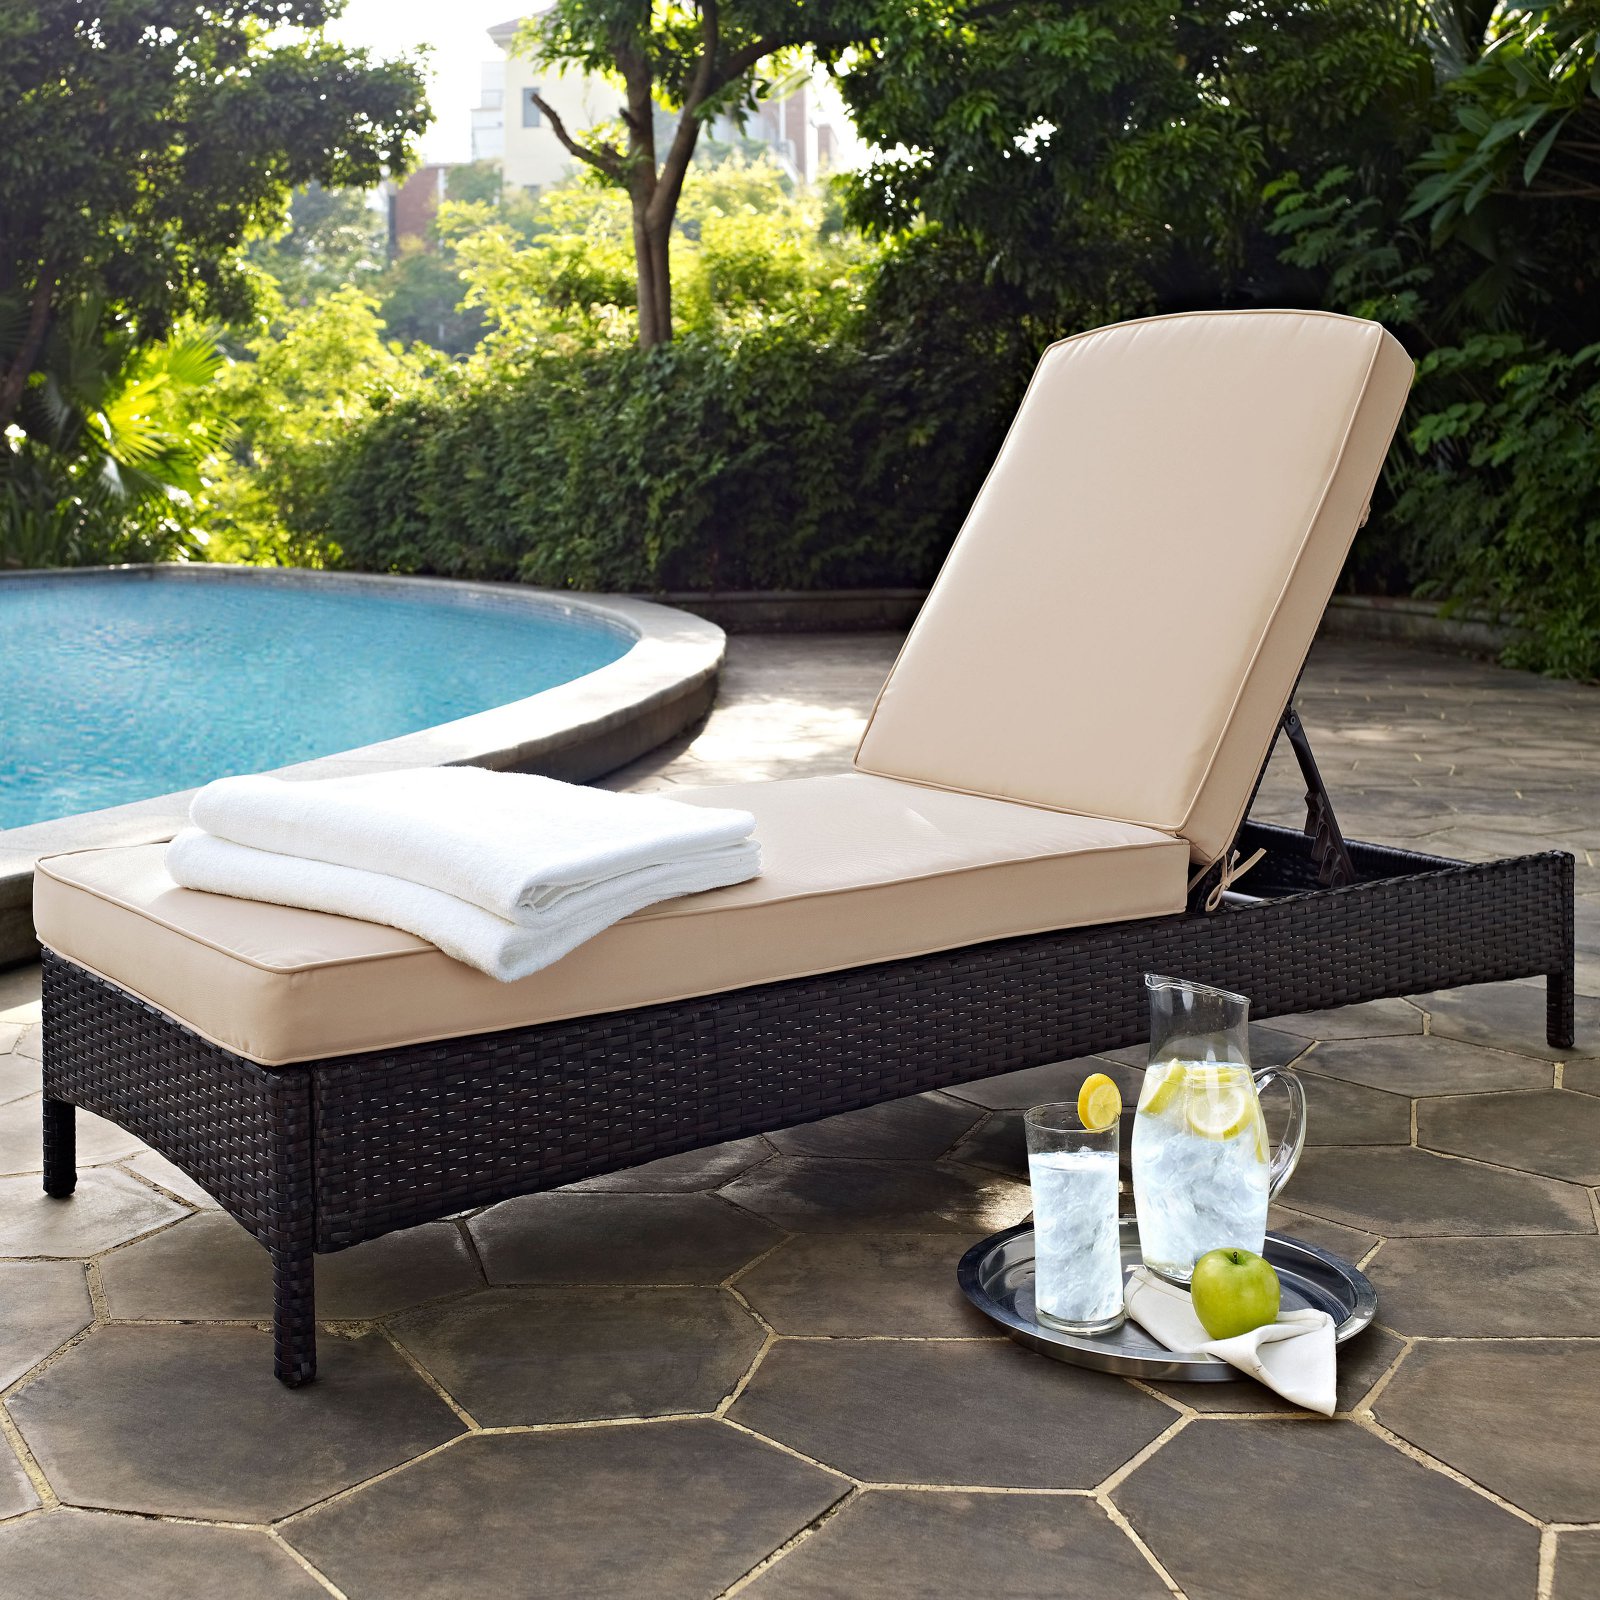 Crosley Palm Harbor Wicker Patio Chaise Lounge in Brown and Sand - image 1 of 9